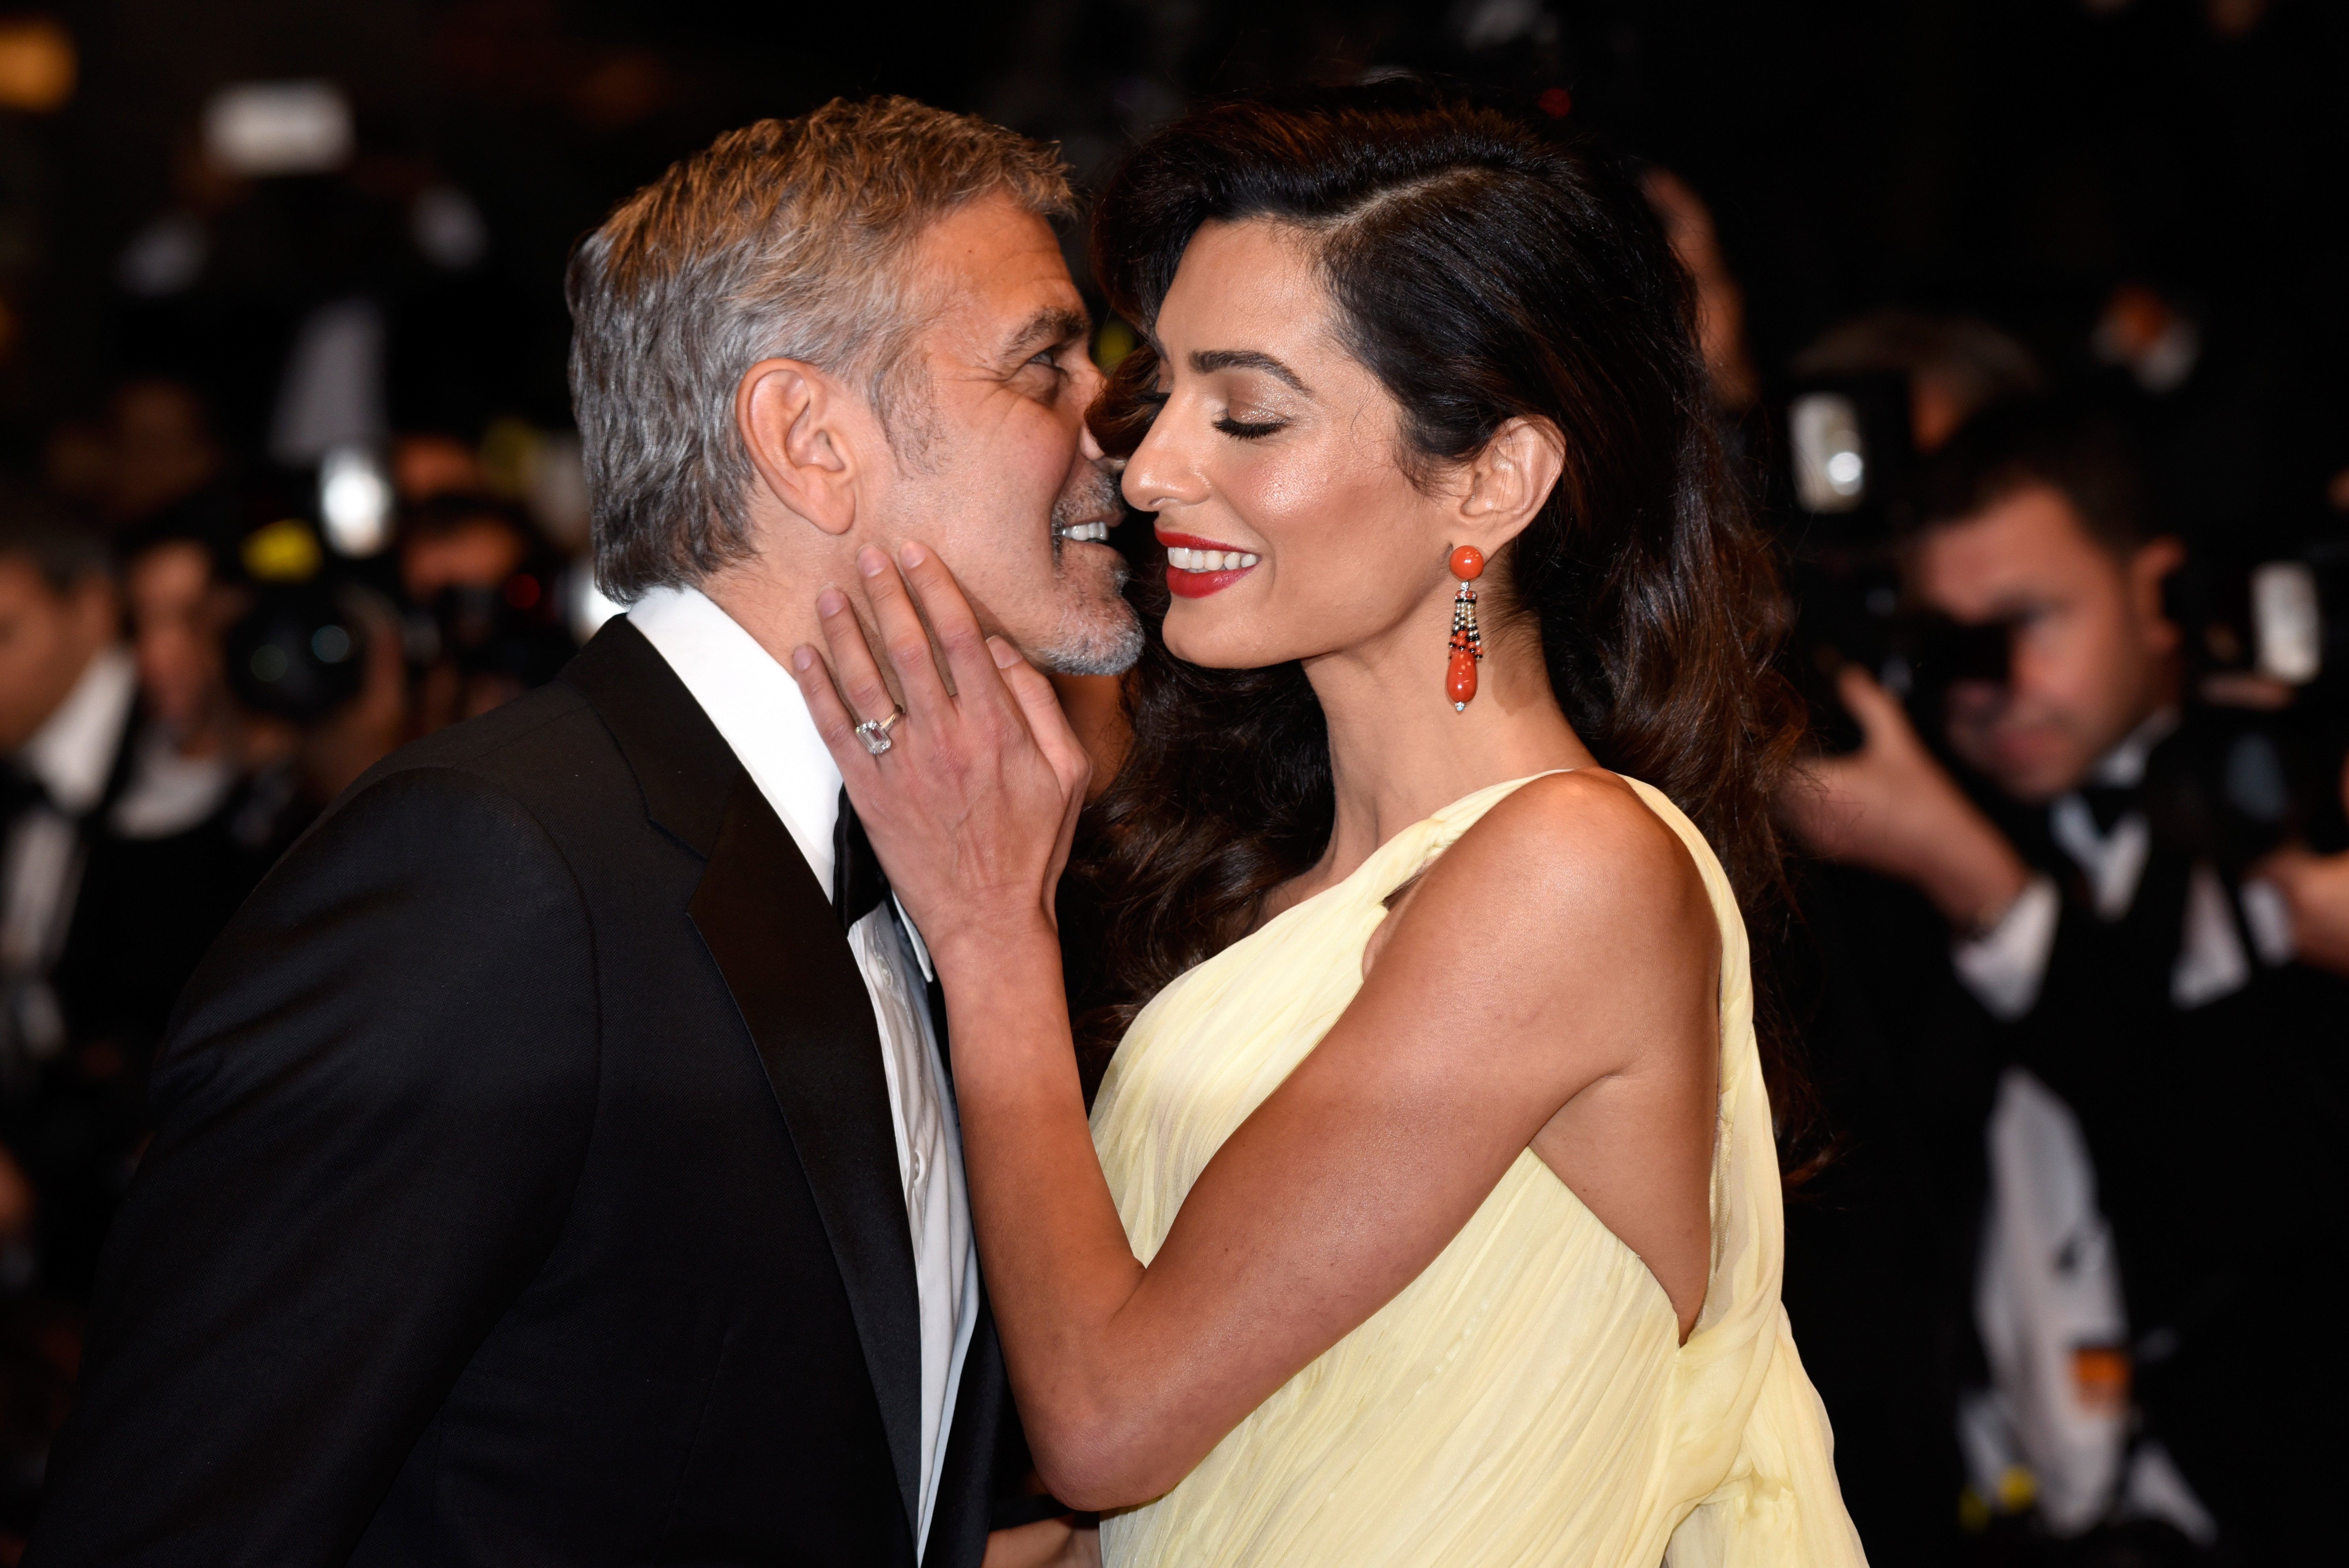 George Clooney and his wife Amal Clooney at the "Money Monster" premiere during the 69th annual Cannes Film Festival at the Palais des Festivals on May 12, 2016 in Cannes, France | Source: Getty Images